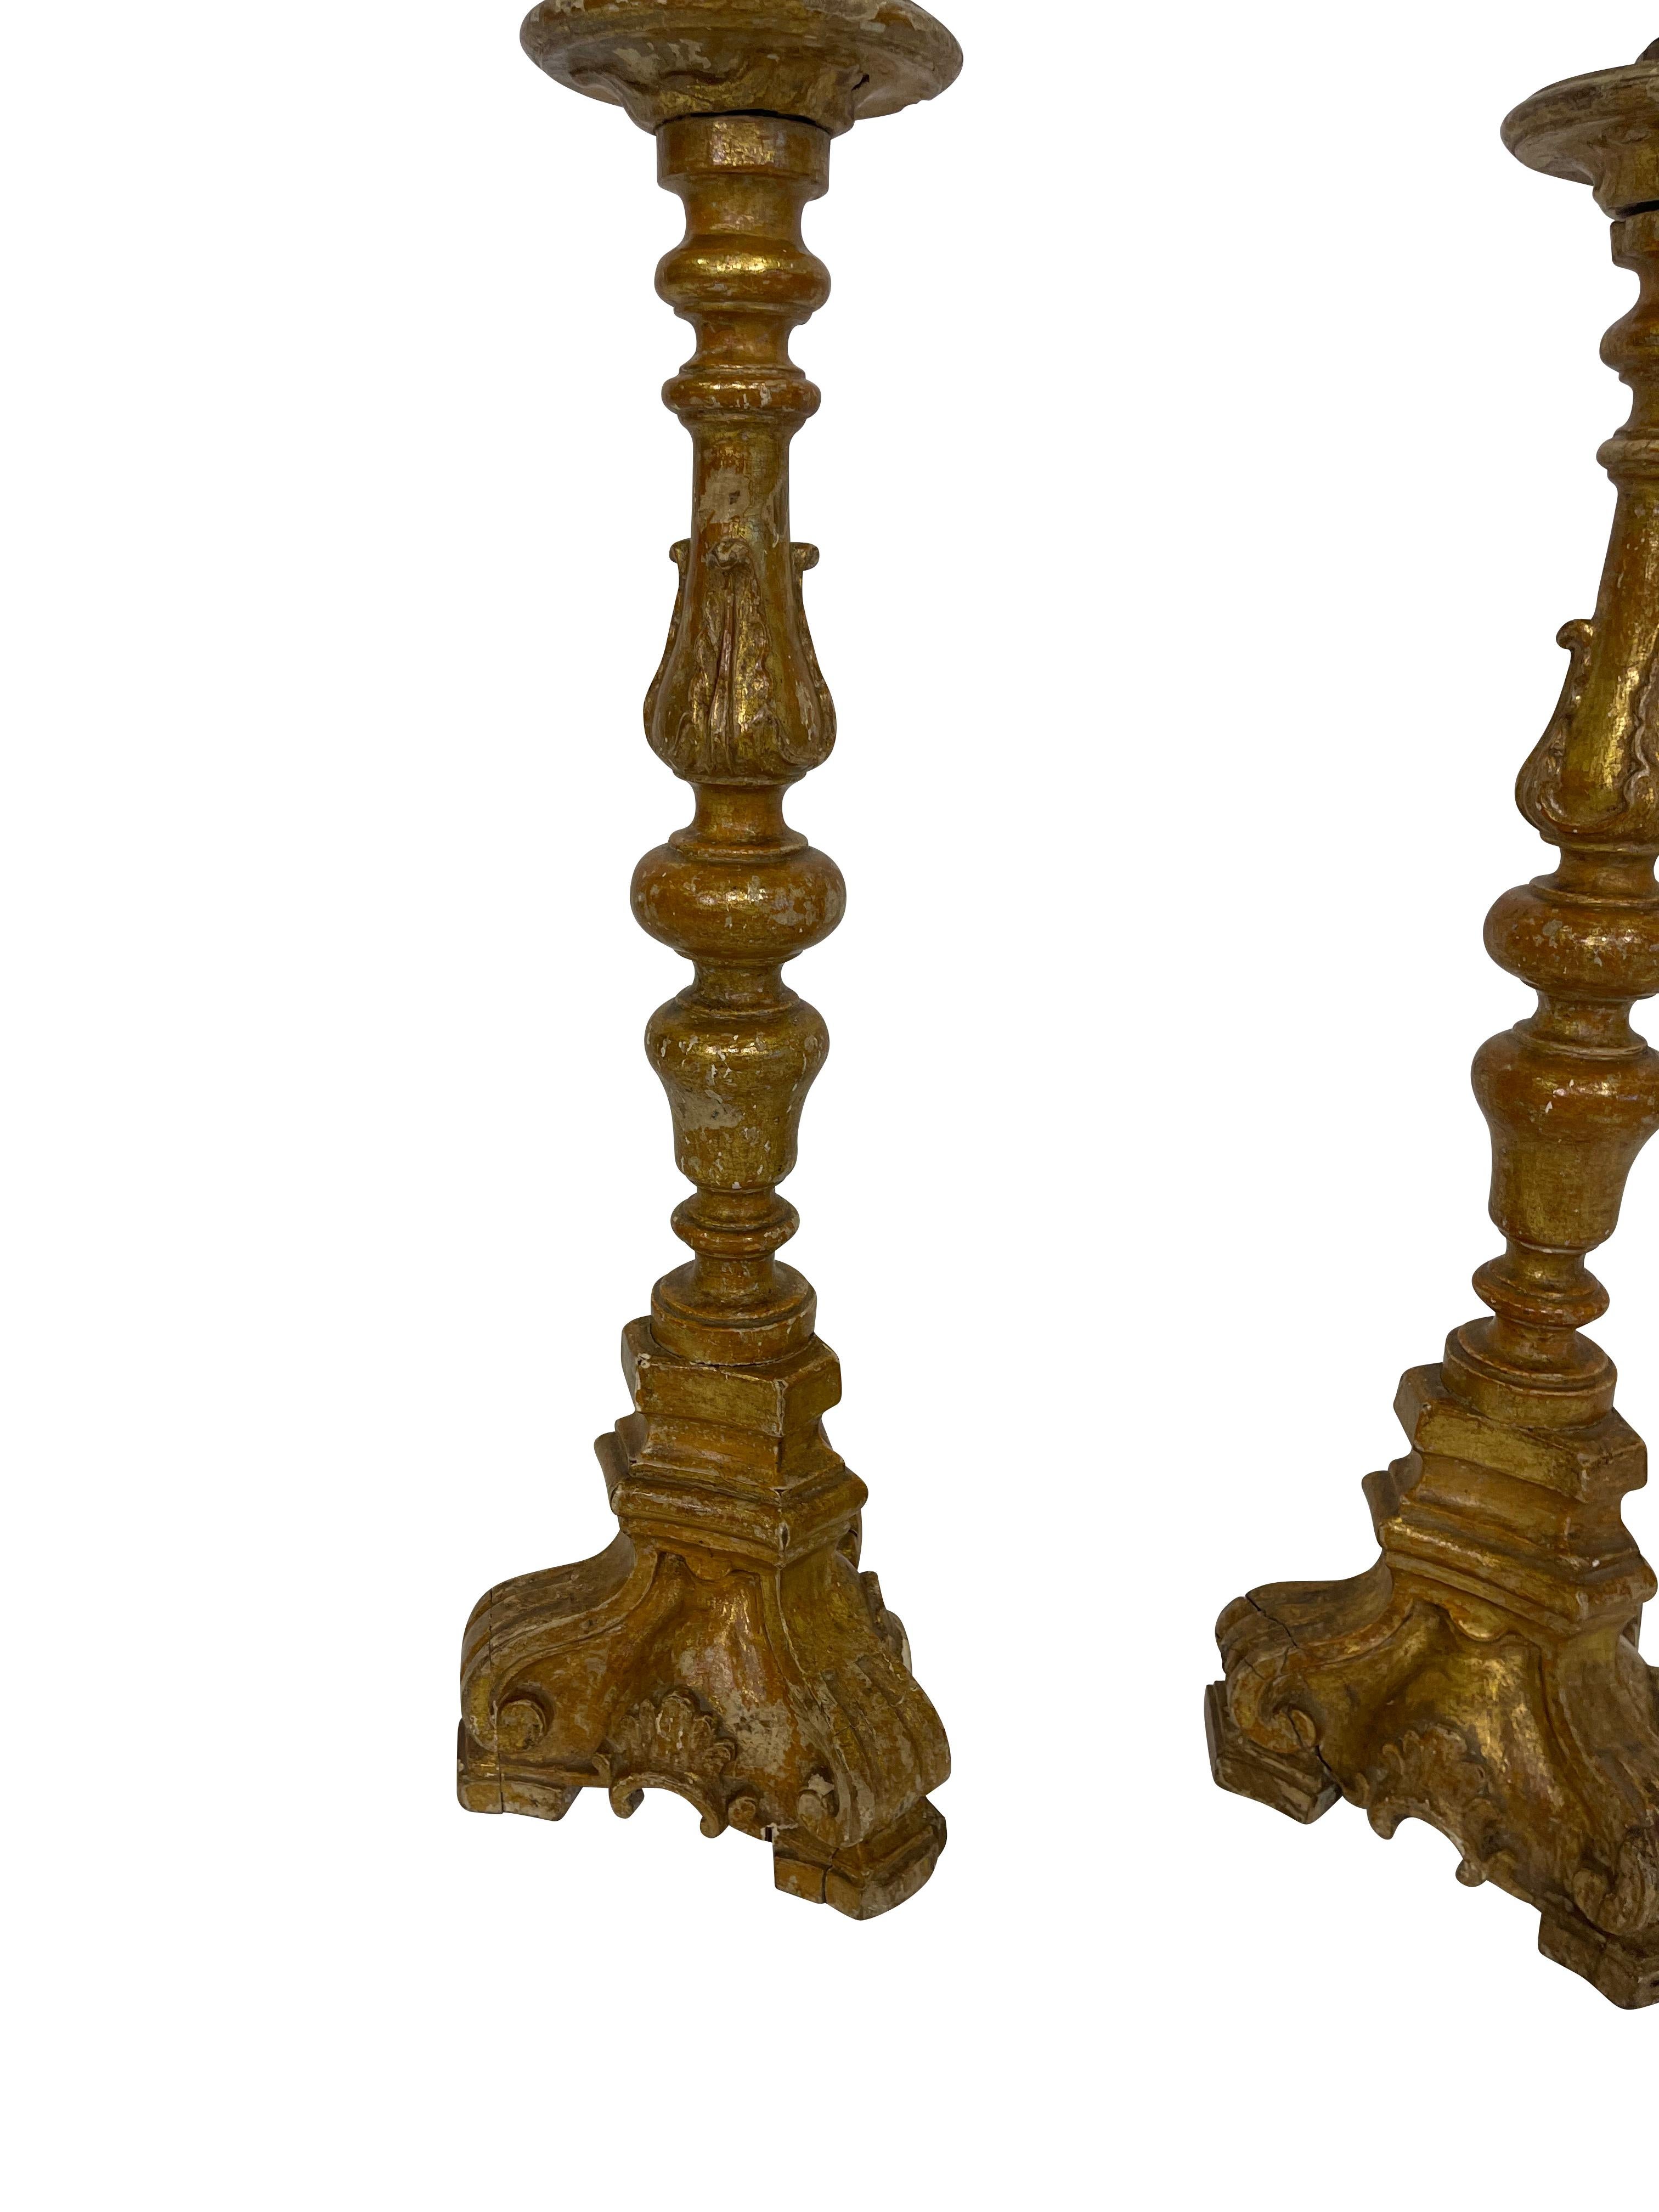 19th Century Antique Italian Baroque Gilt Candlesticks / Candelabra In Good Condition For Sale In Essex, MA